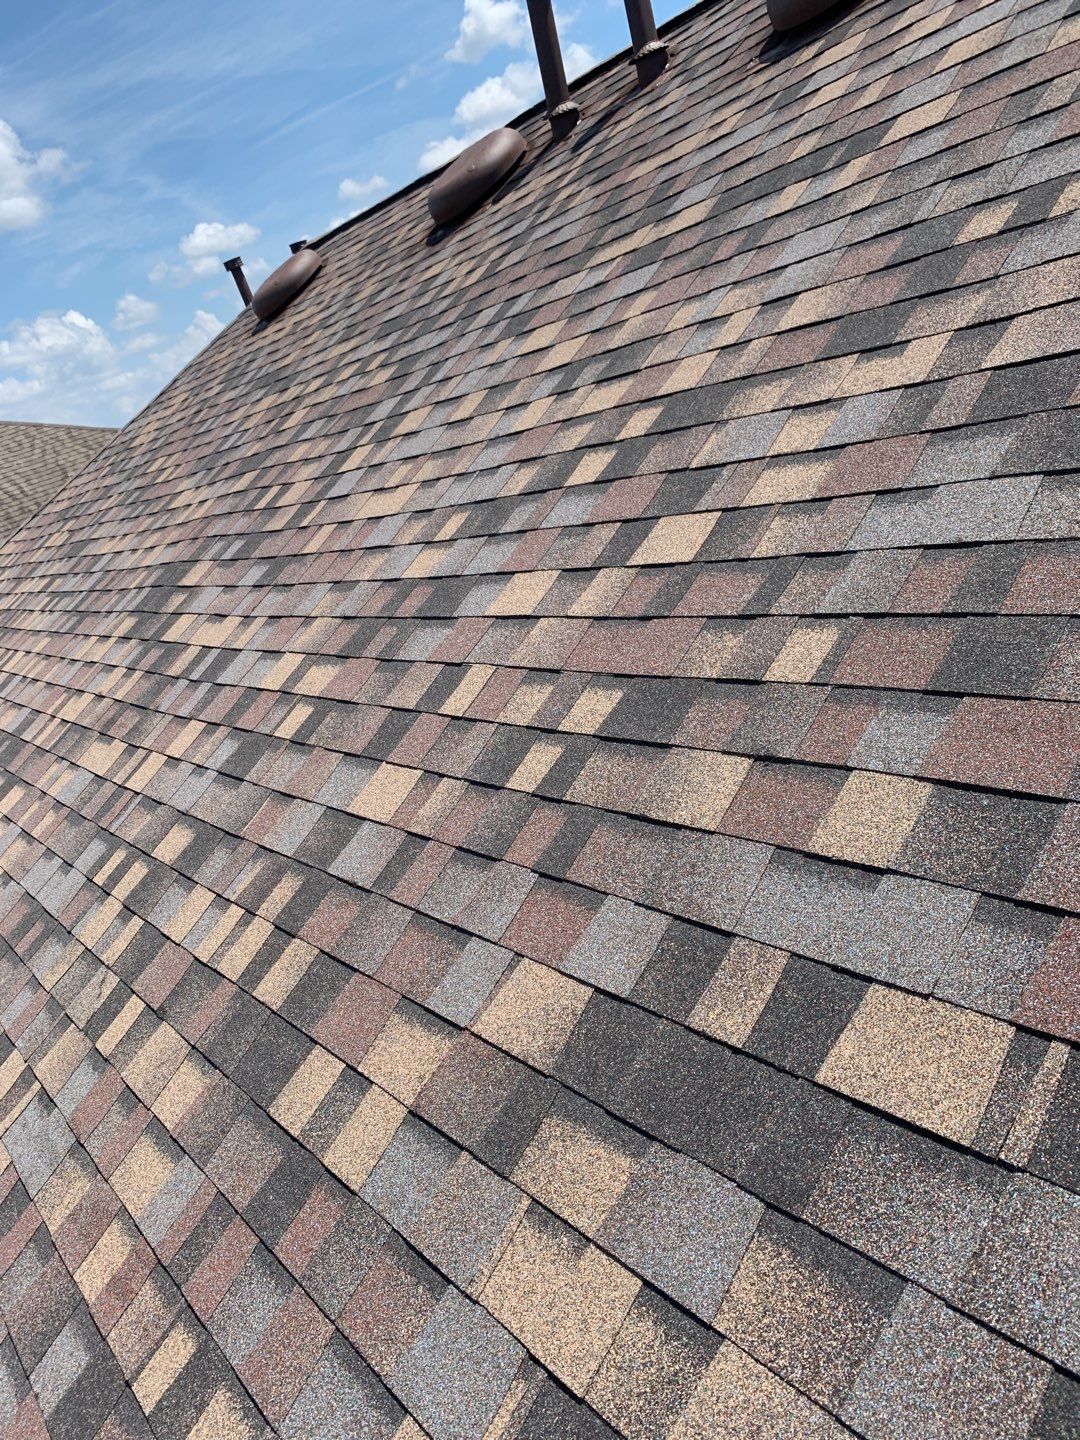 Best roofing materials for hot climates